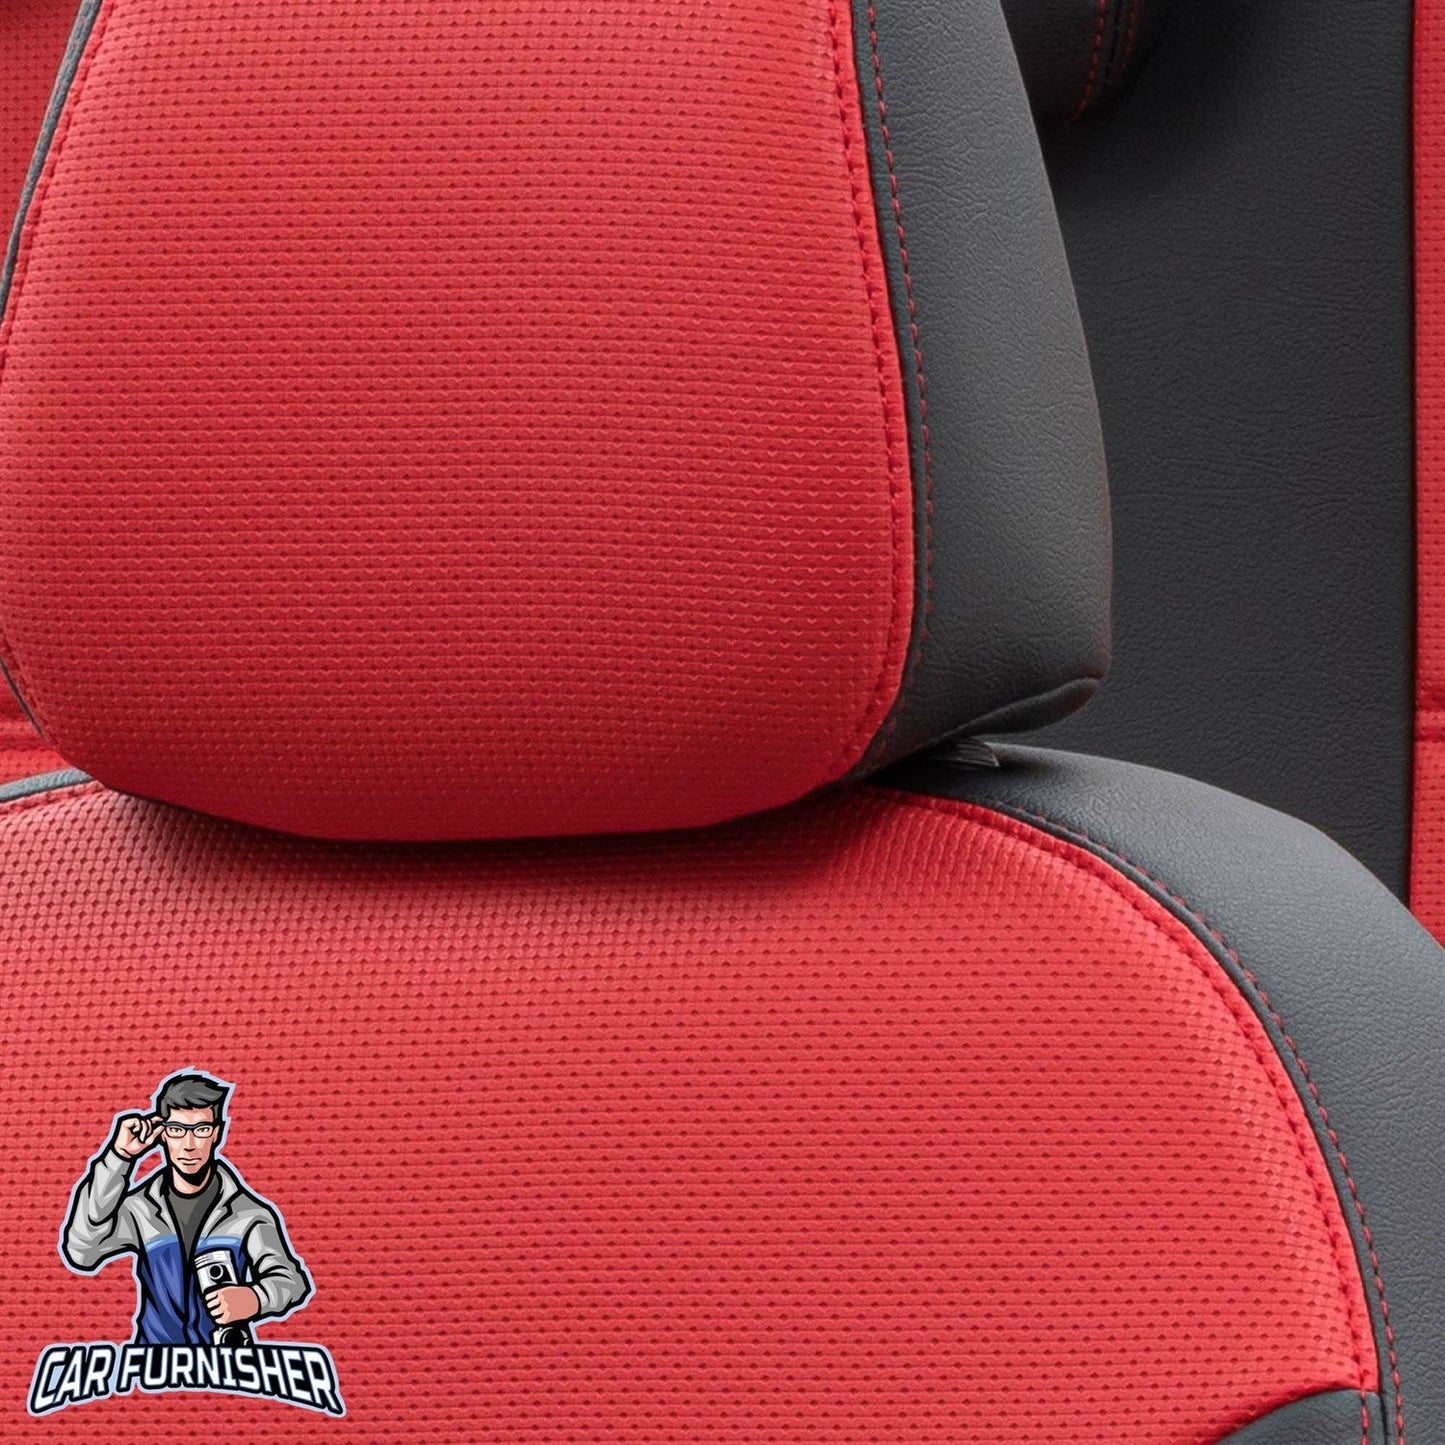 Peugeot Partner Seat Covers New York Leather Design Red Leather